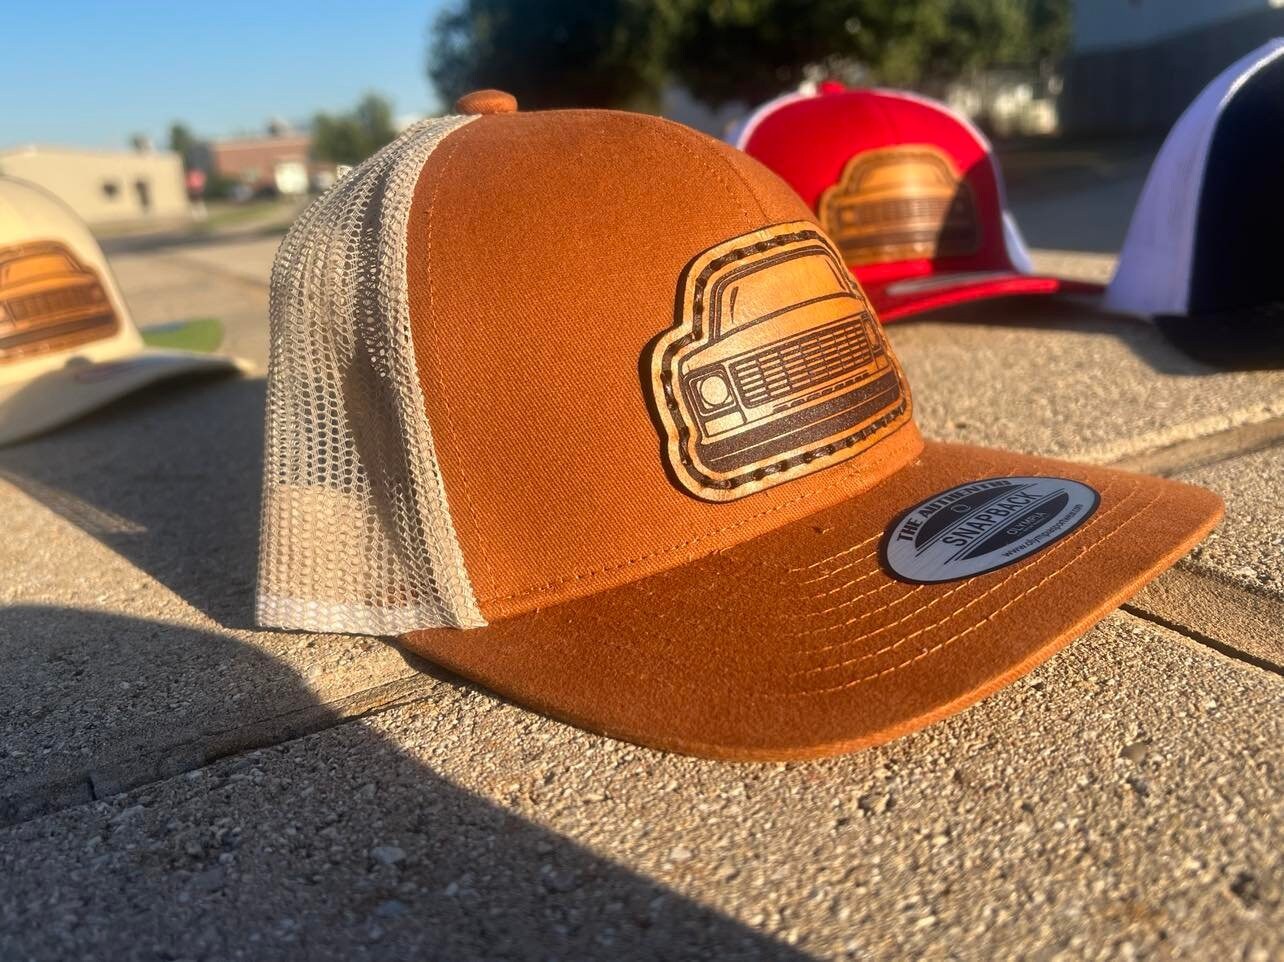 Leather Patch Chevy Round Eye Silverado Trucker Hat - Olympia Blend Vintage Style, Unique Look, Snapback Closure - Perfect for Chevy Fans!